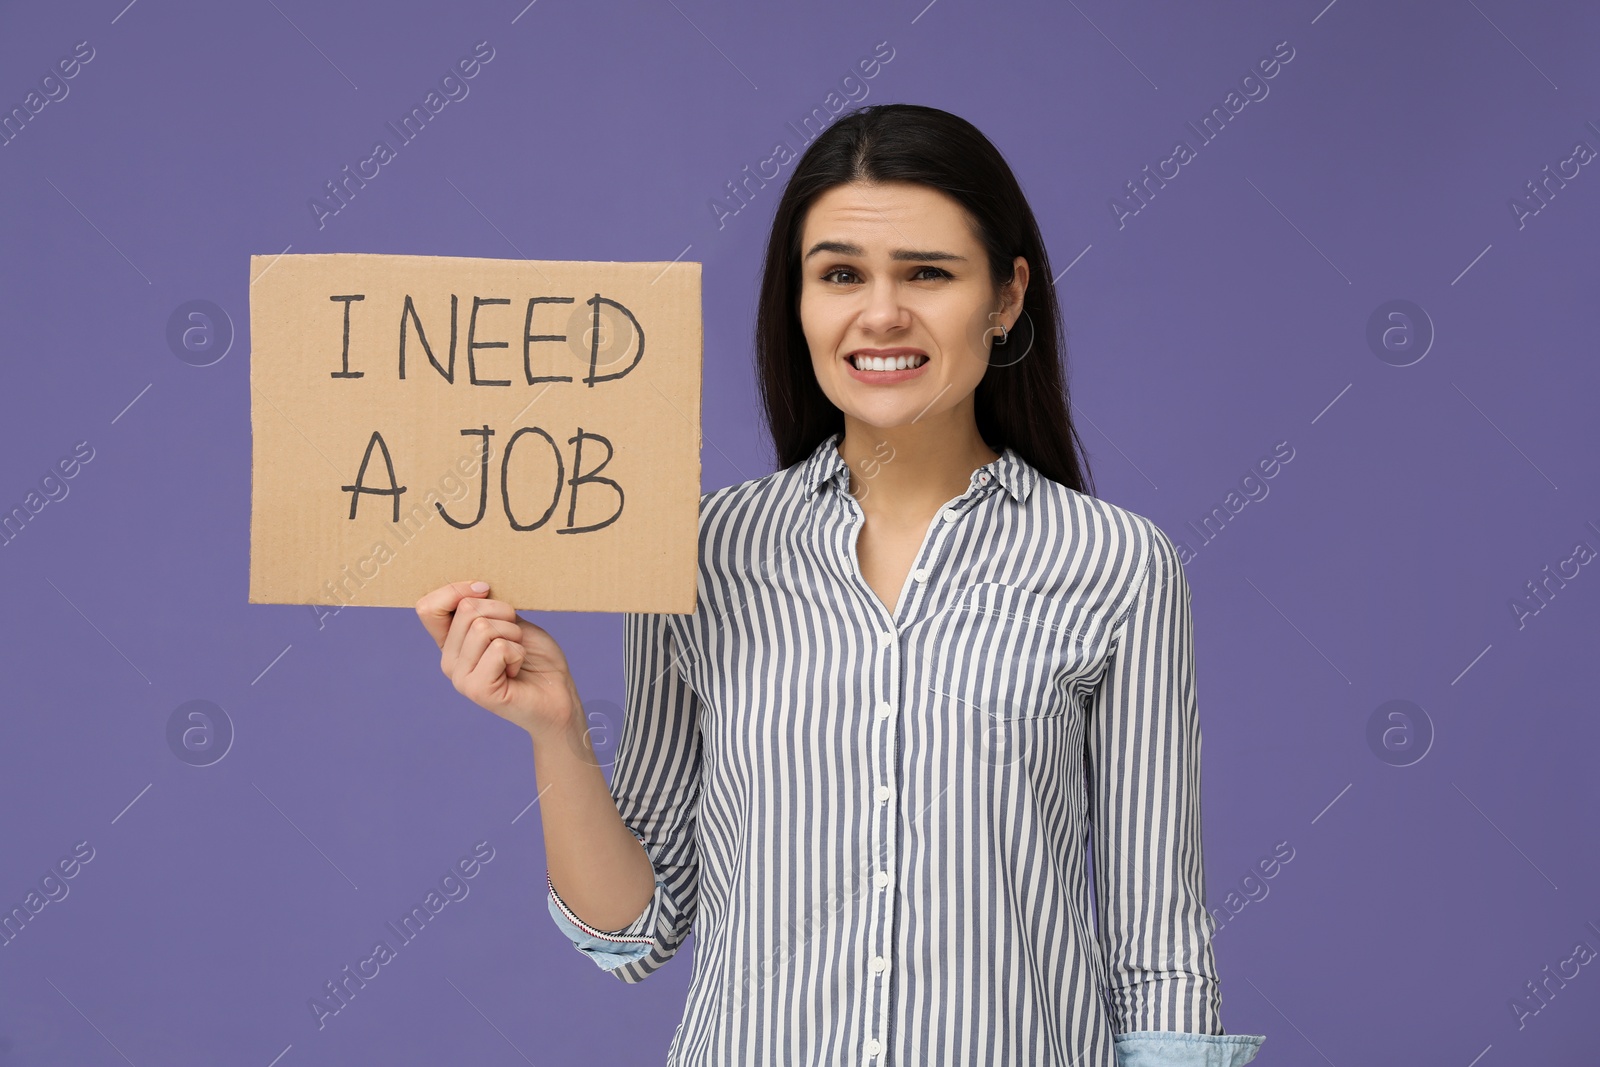 Photo of Unemployment problem. Unhappy woman holding sign with phrase I Need A Job on violet background